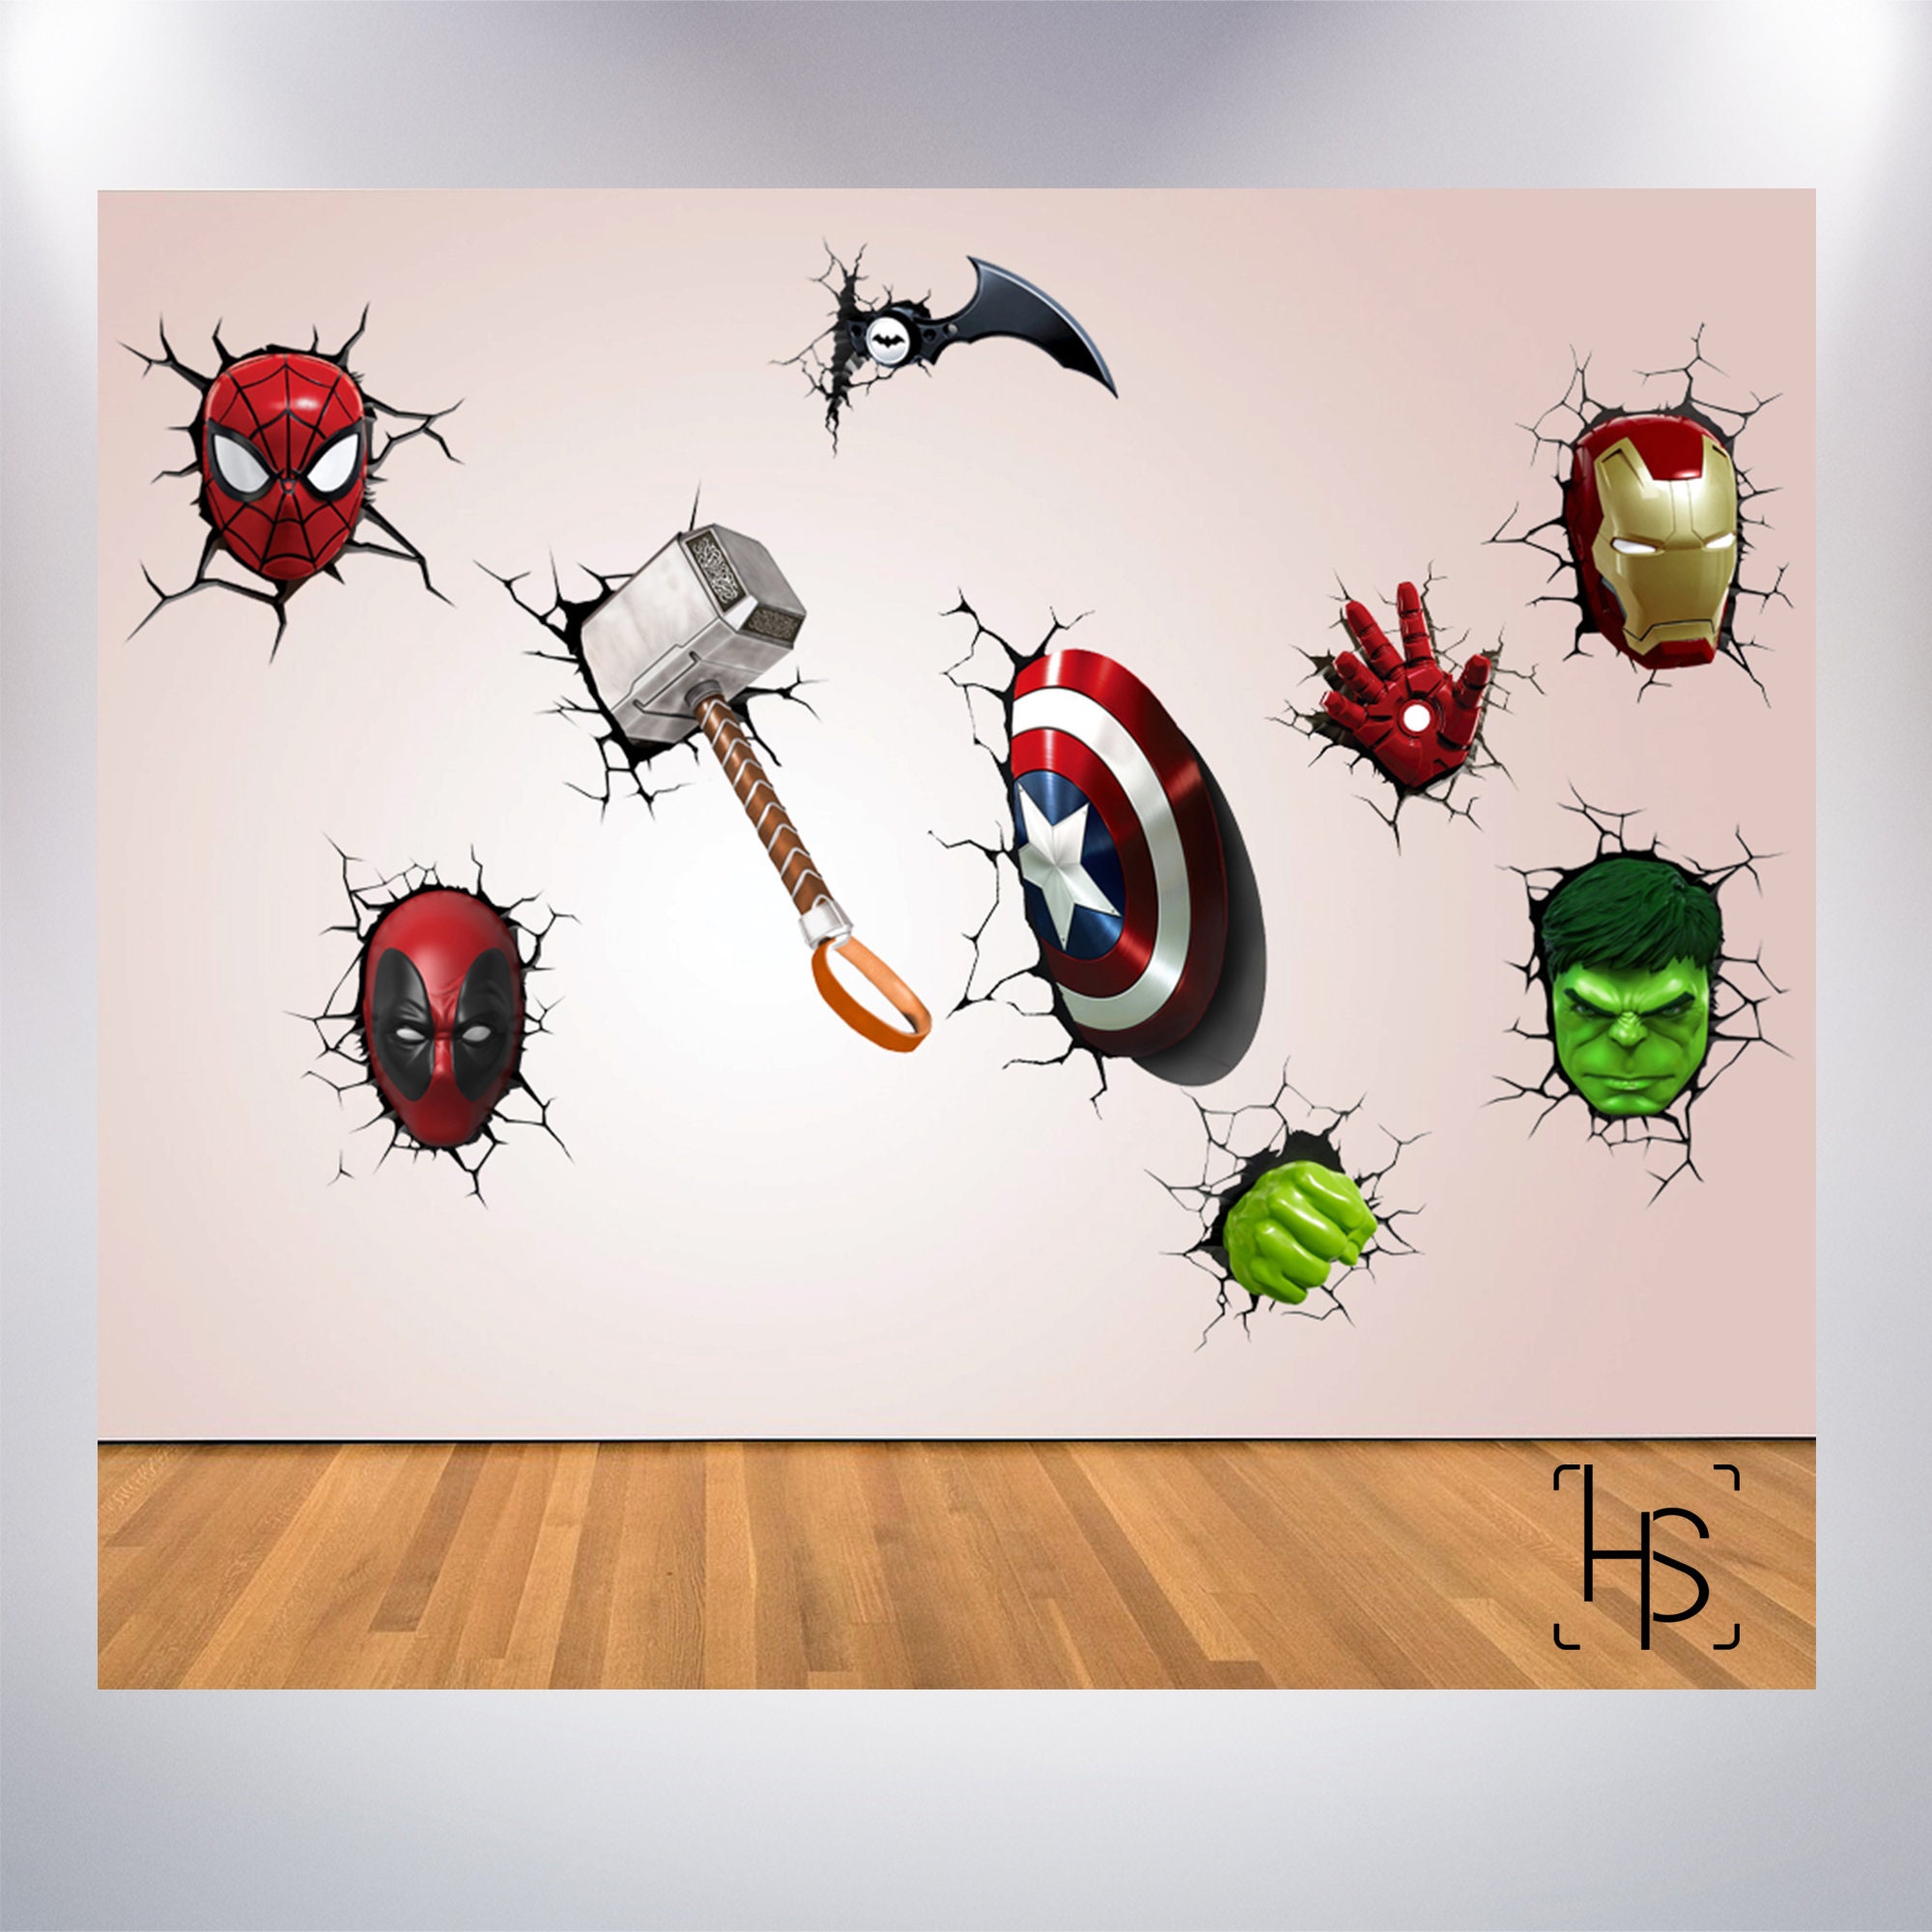 Deadpool Wall Decal Repositionable Sticker Graphic-Superhero-Marvel-Great Gift! 